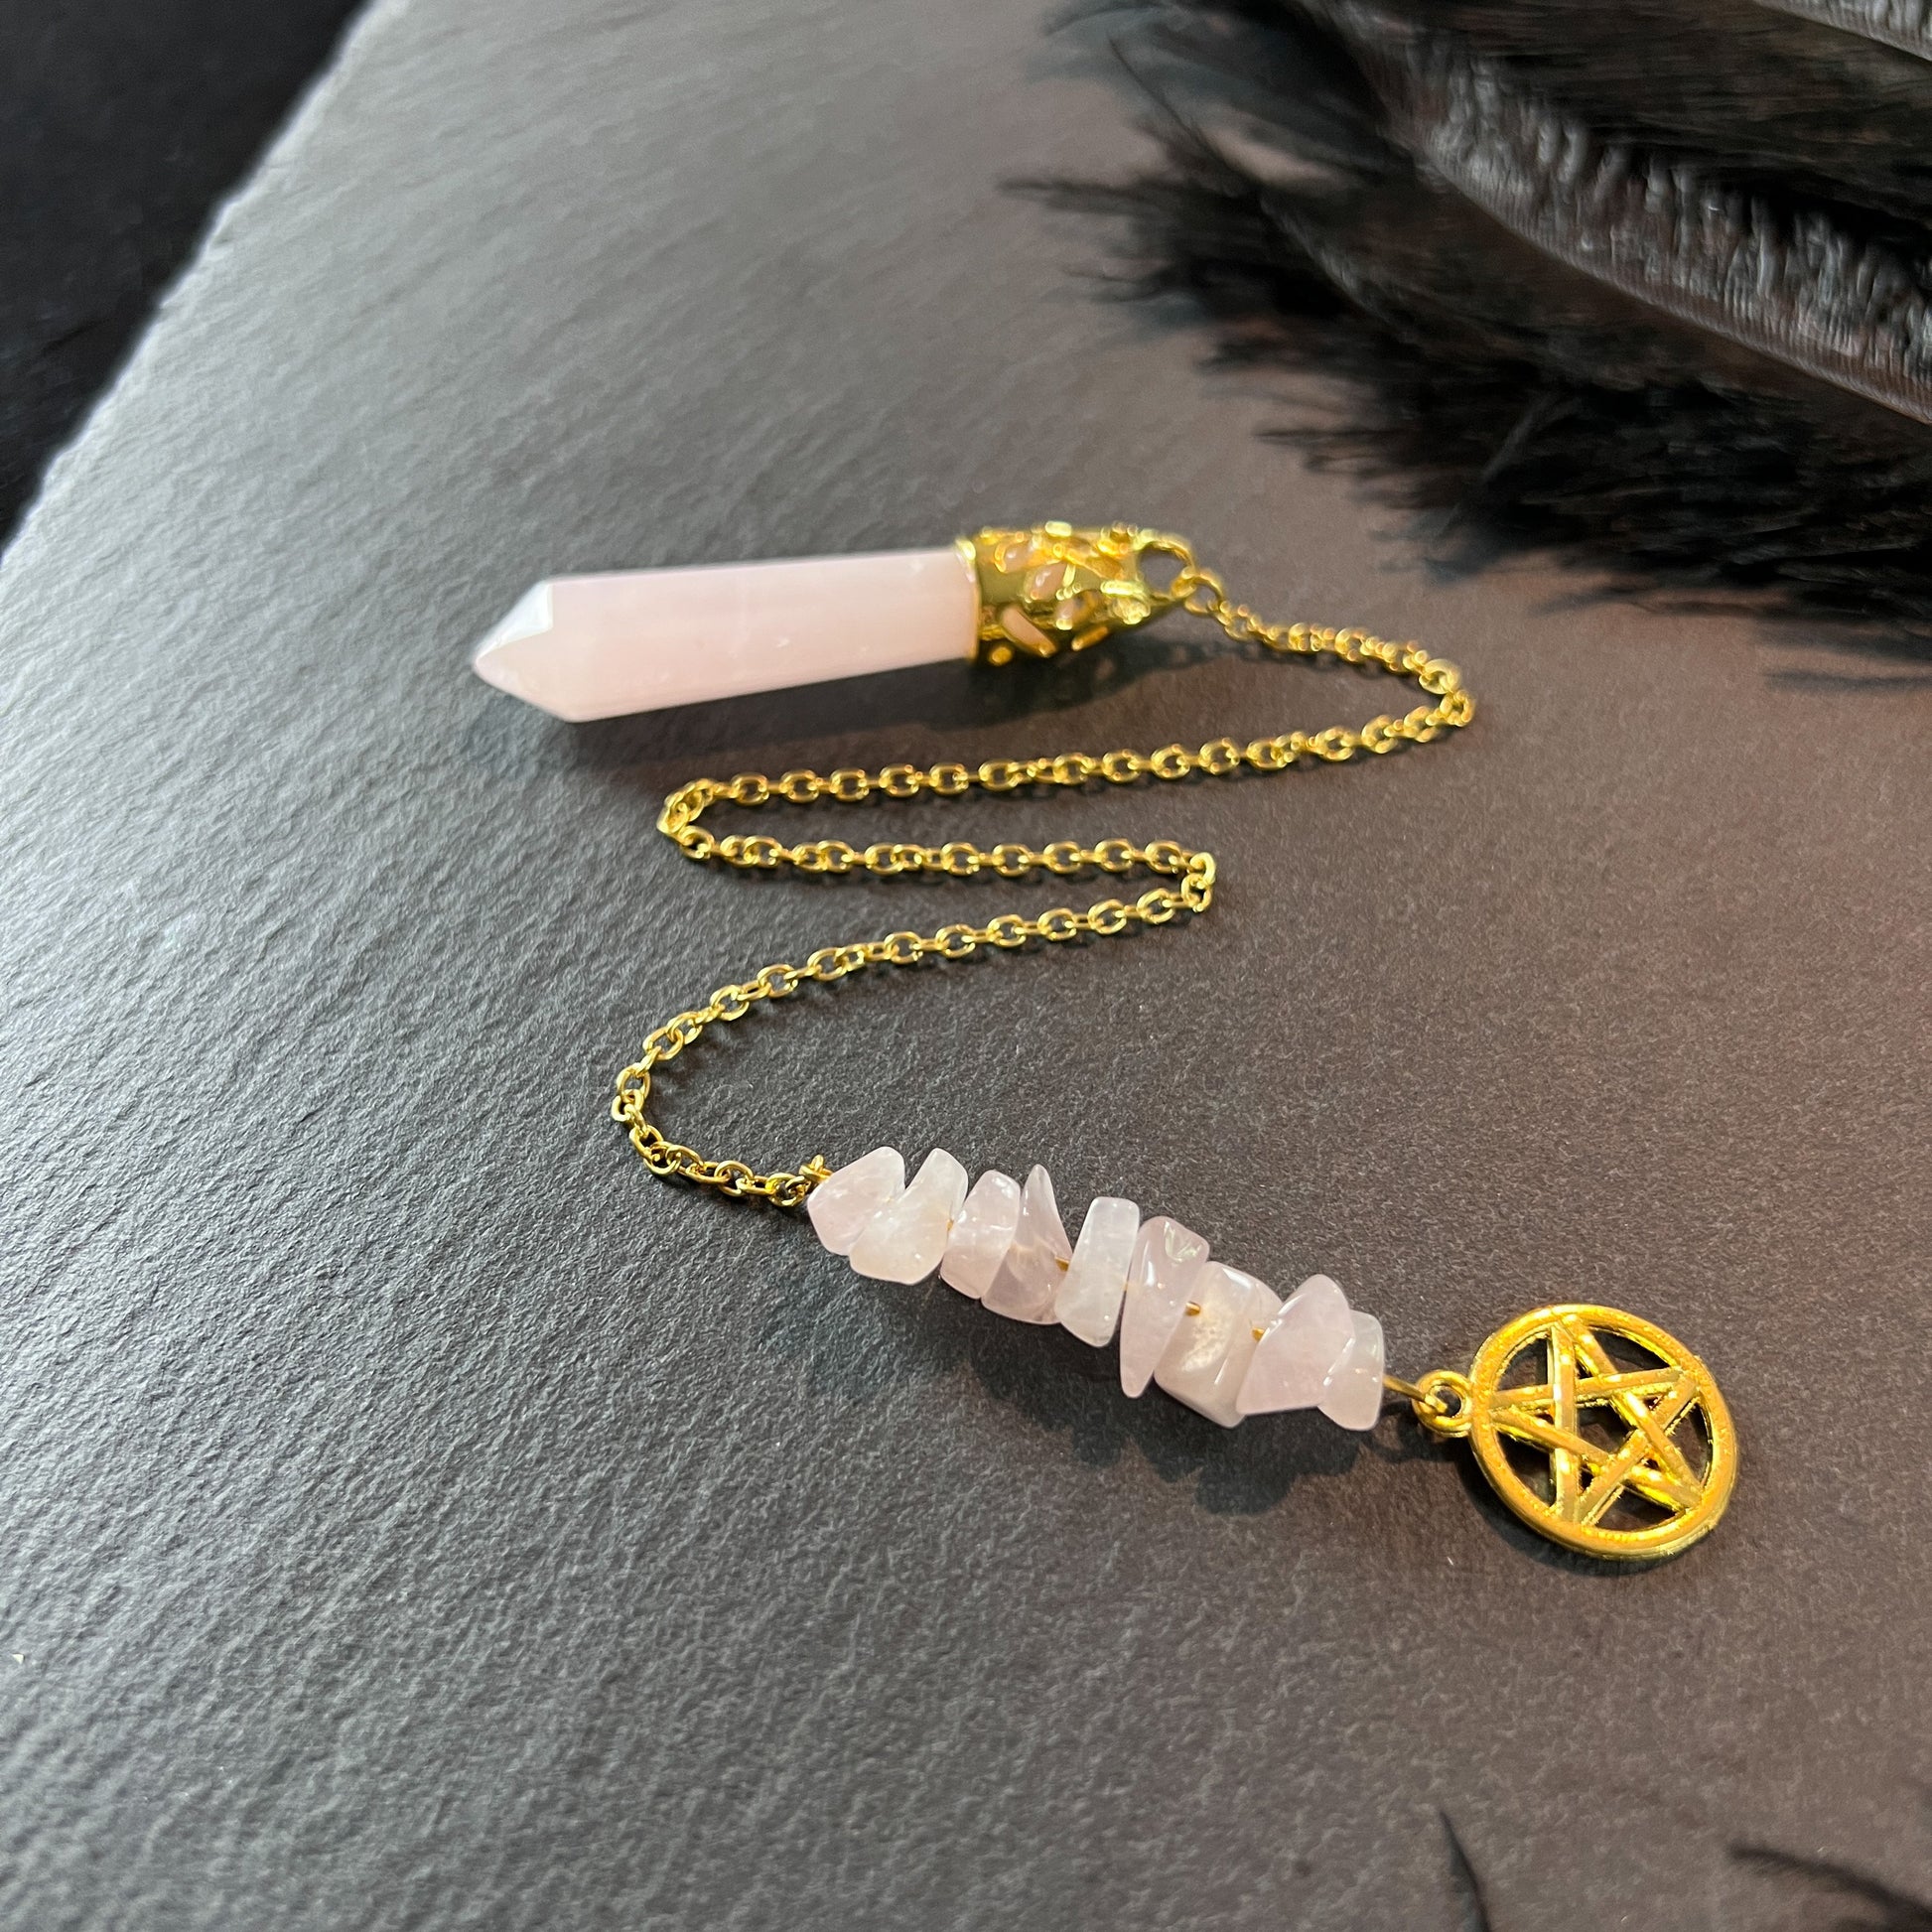 Gemstone pendulum rose quartz and pentacle gold tone wiccan divination tool for pagan witchcraft